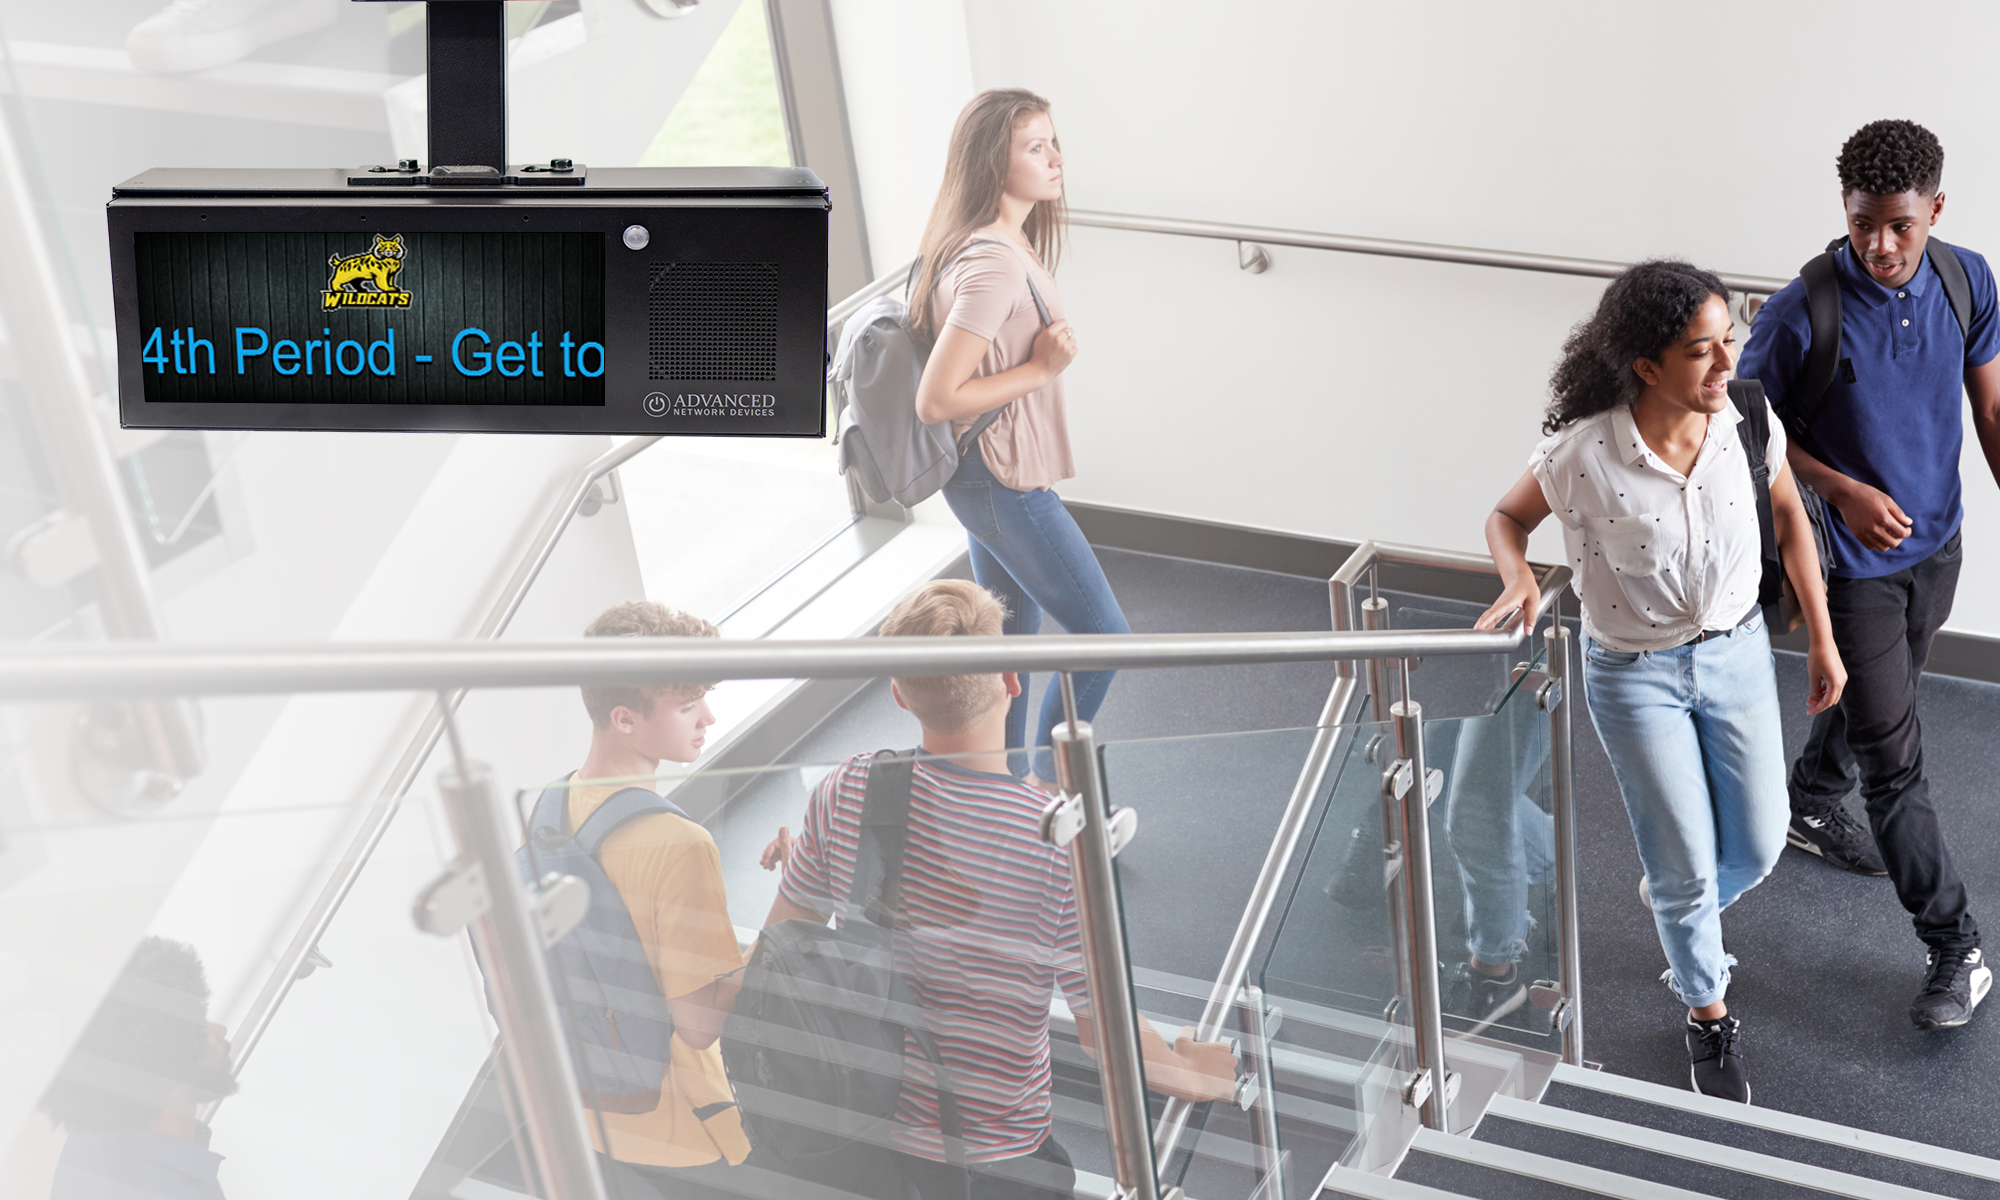 bell-scheduling-on-double-sided-hd-ip-display-in-school-stairway